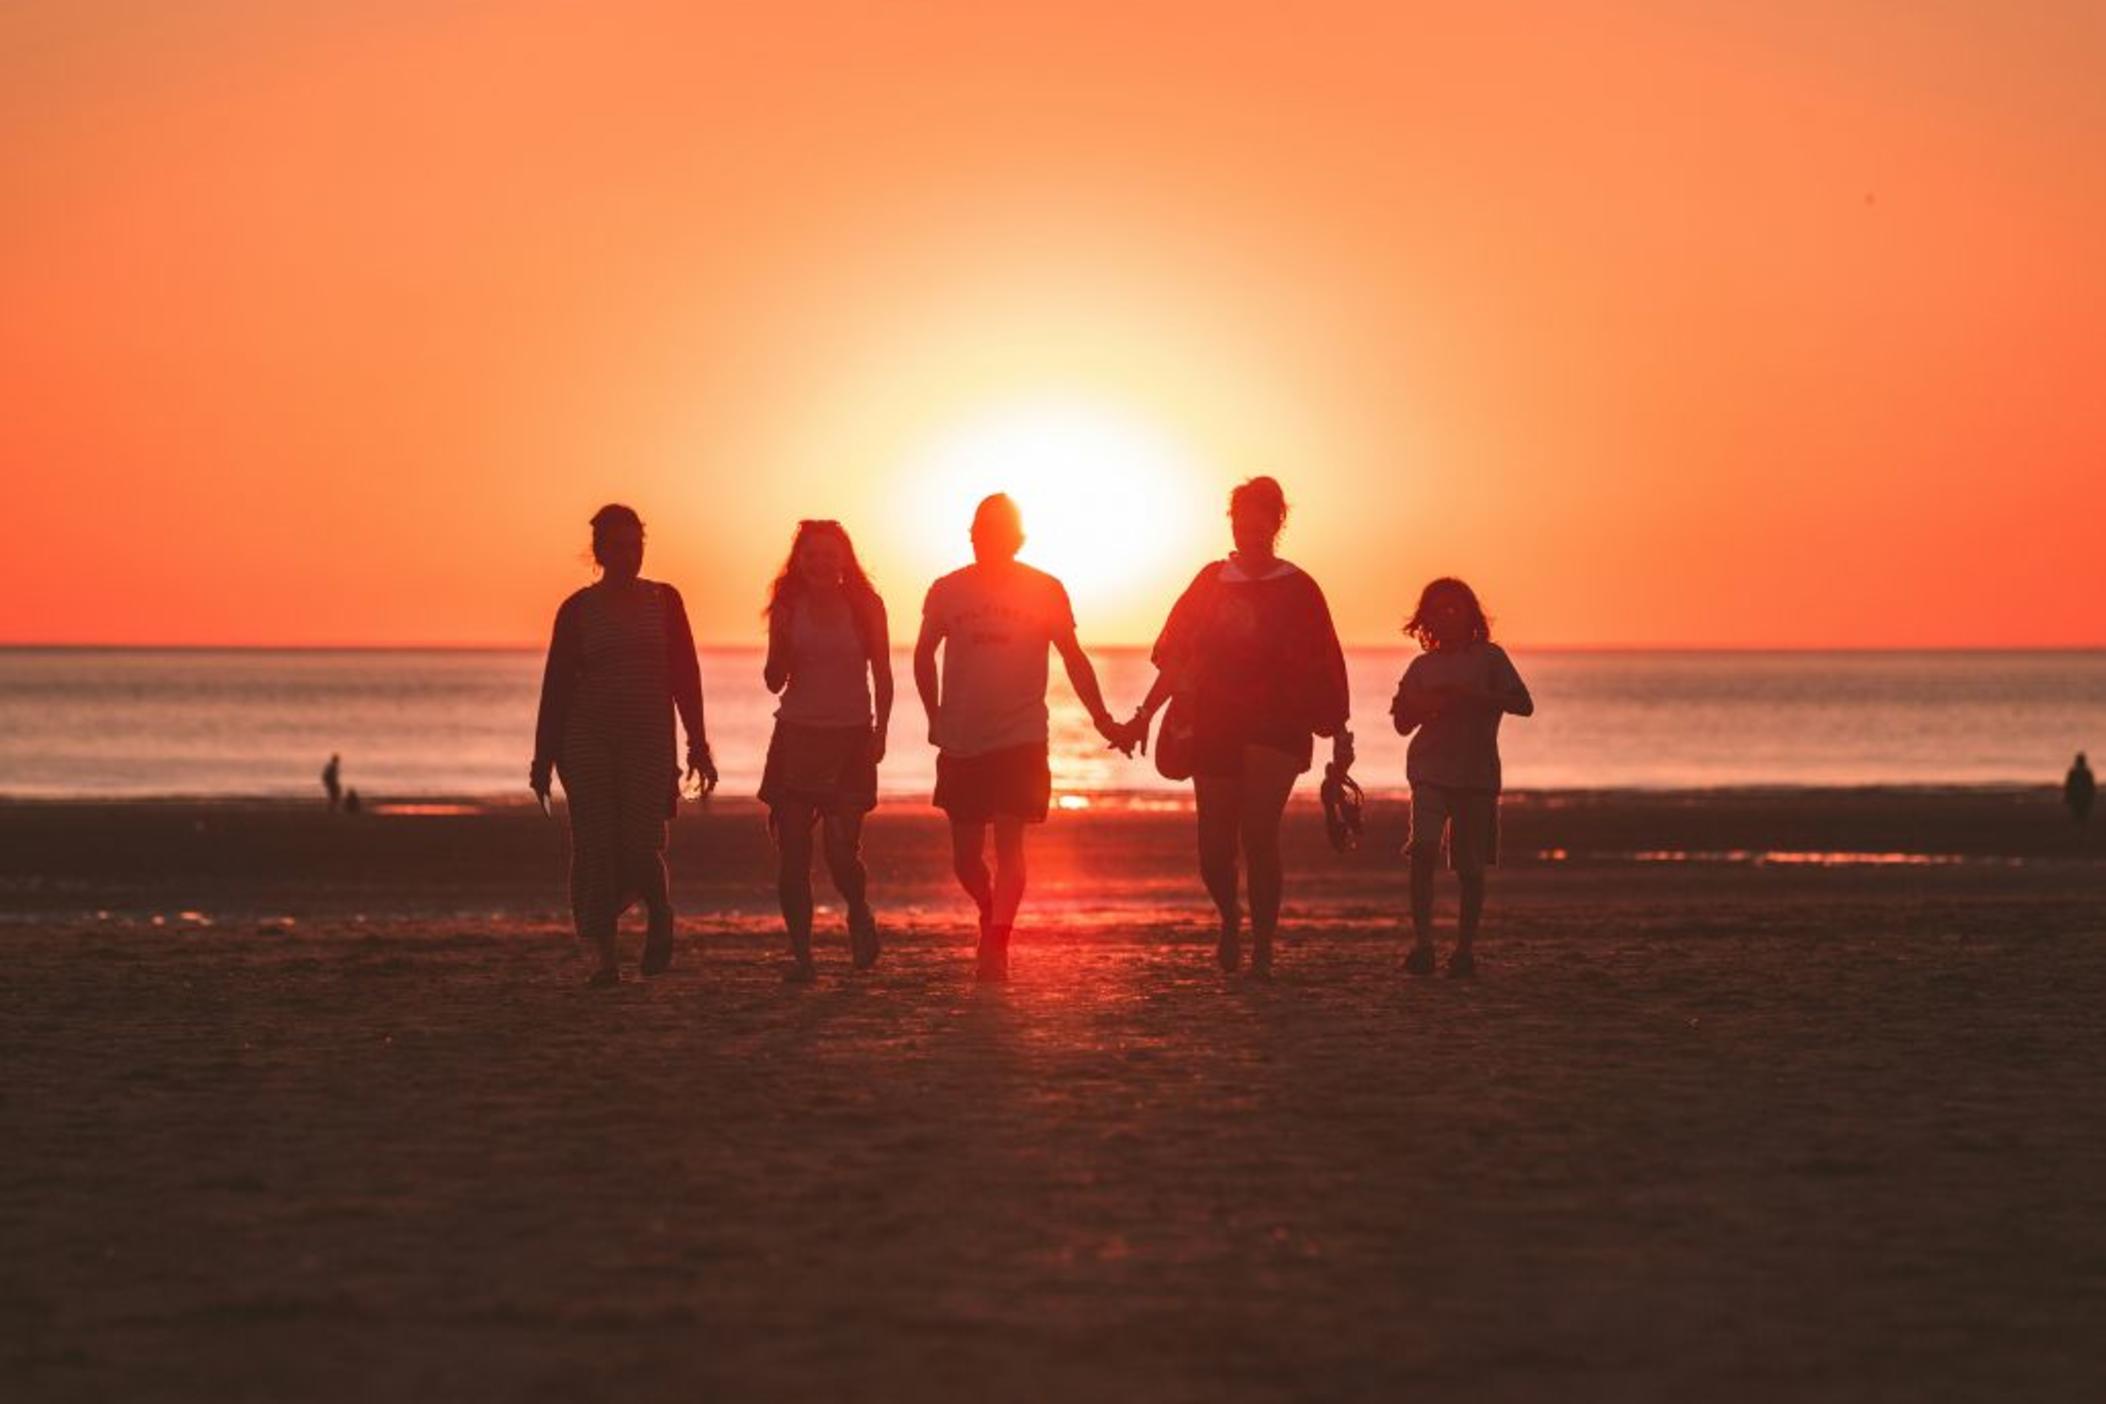 Silhouettes of a family of 5 on the beach at sunset.